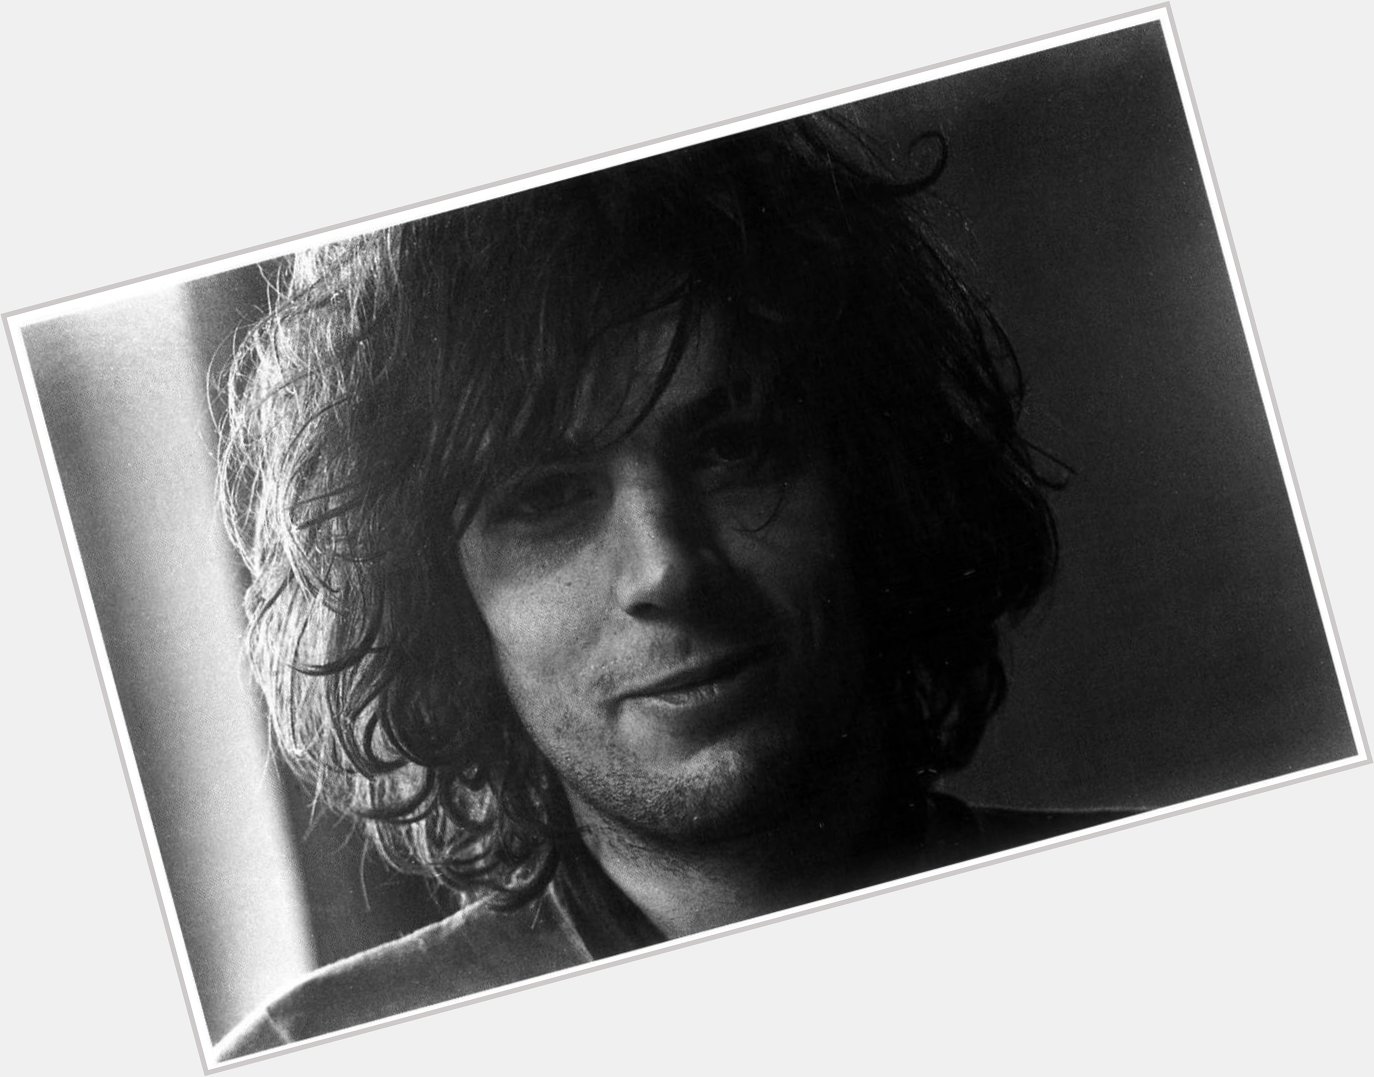 Born on this day 1946, Syd Barrett, guitarist, singer, songwriter with Pink Floyd. Happy Birthday Syd! RIP 